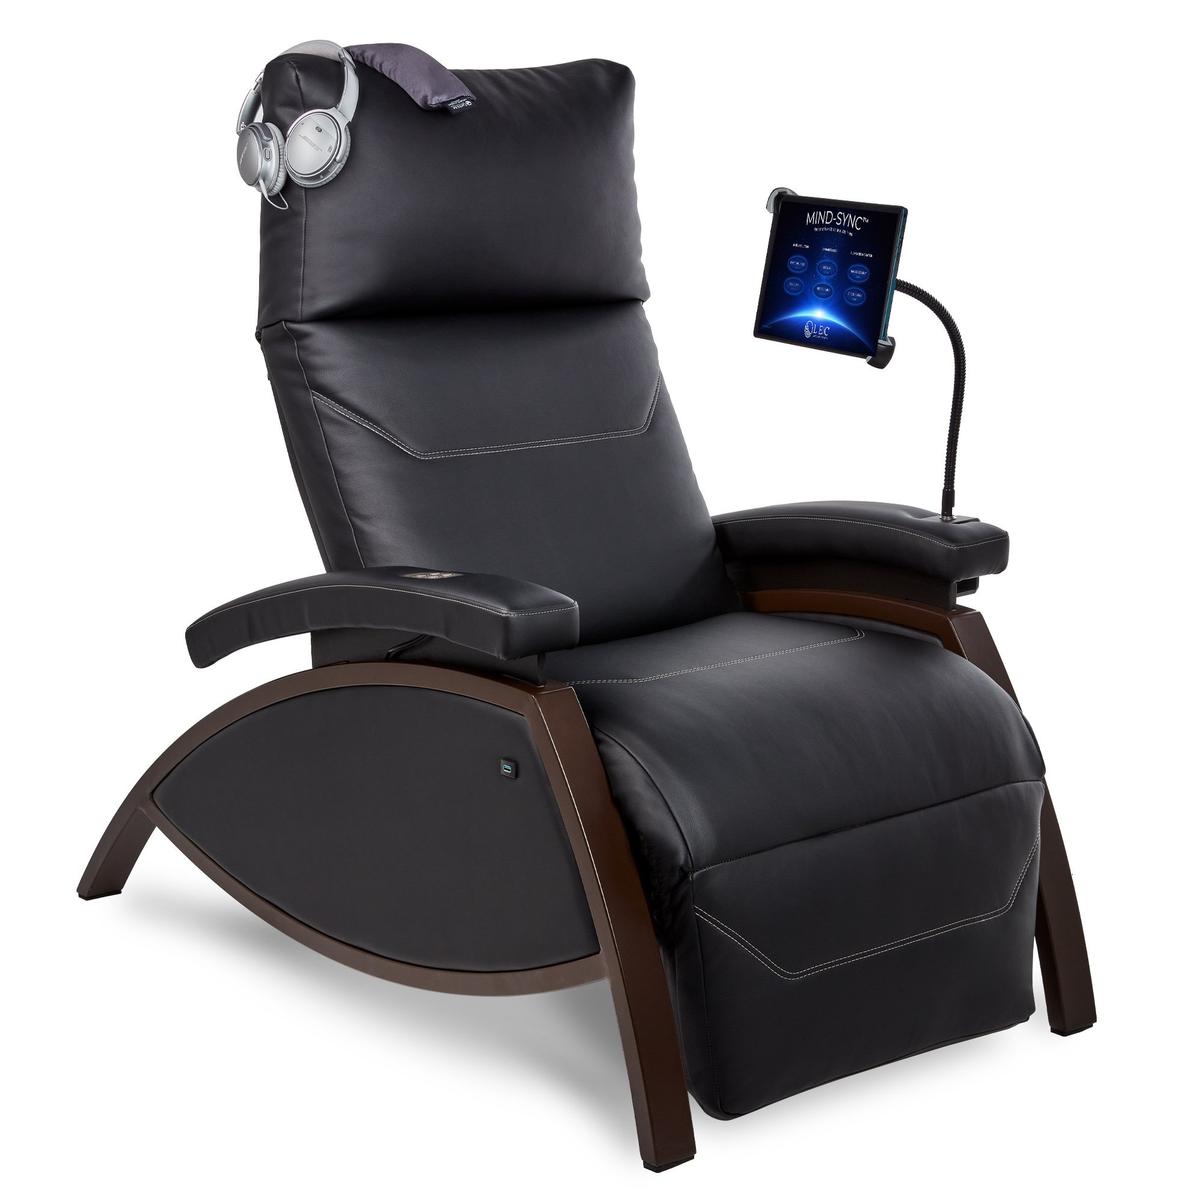 The Mind-Sync Lounger is now available for delivery in February with an MSRP set at US$9,950 (€8,830, £7,542)
